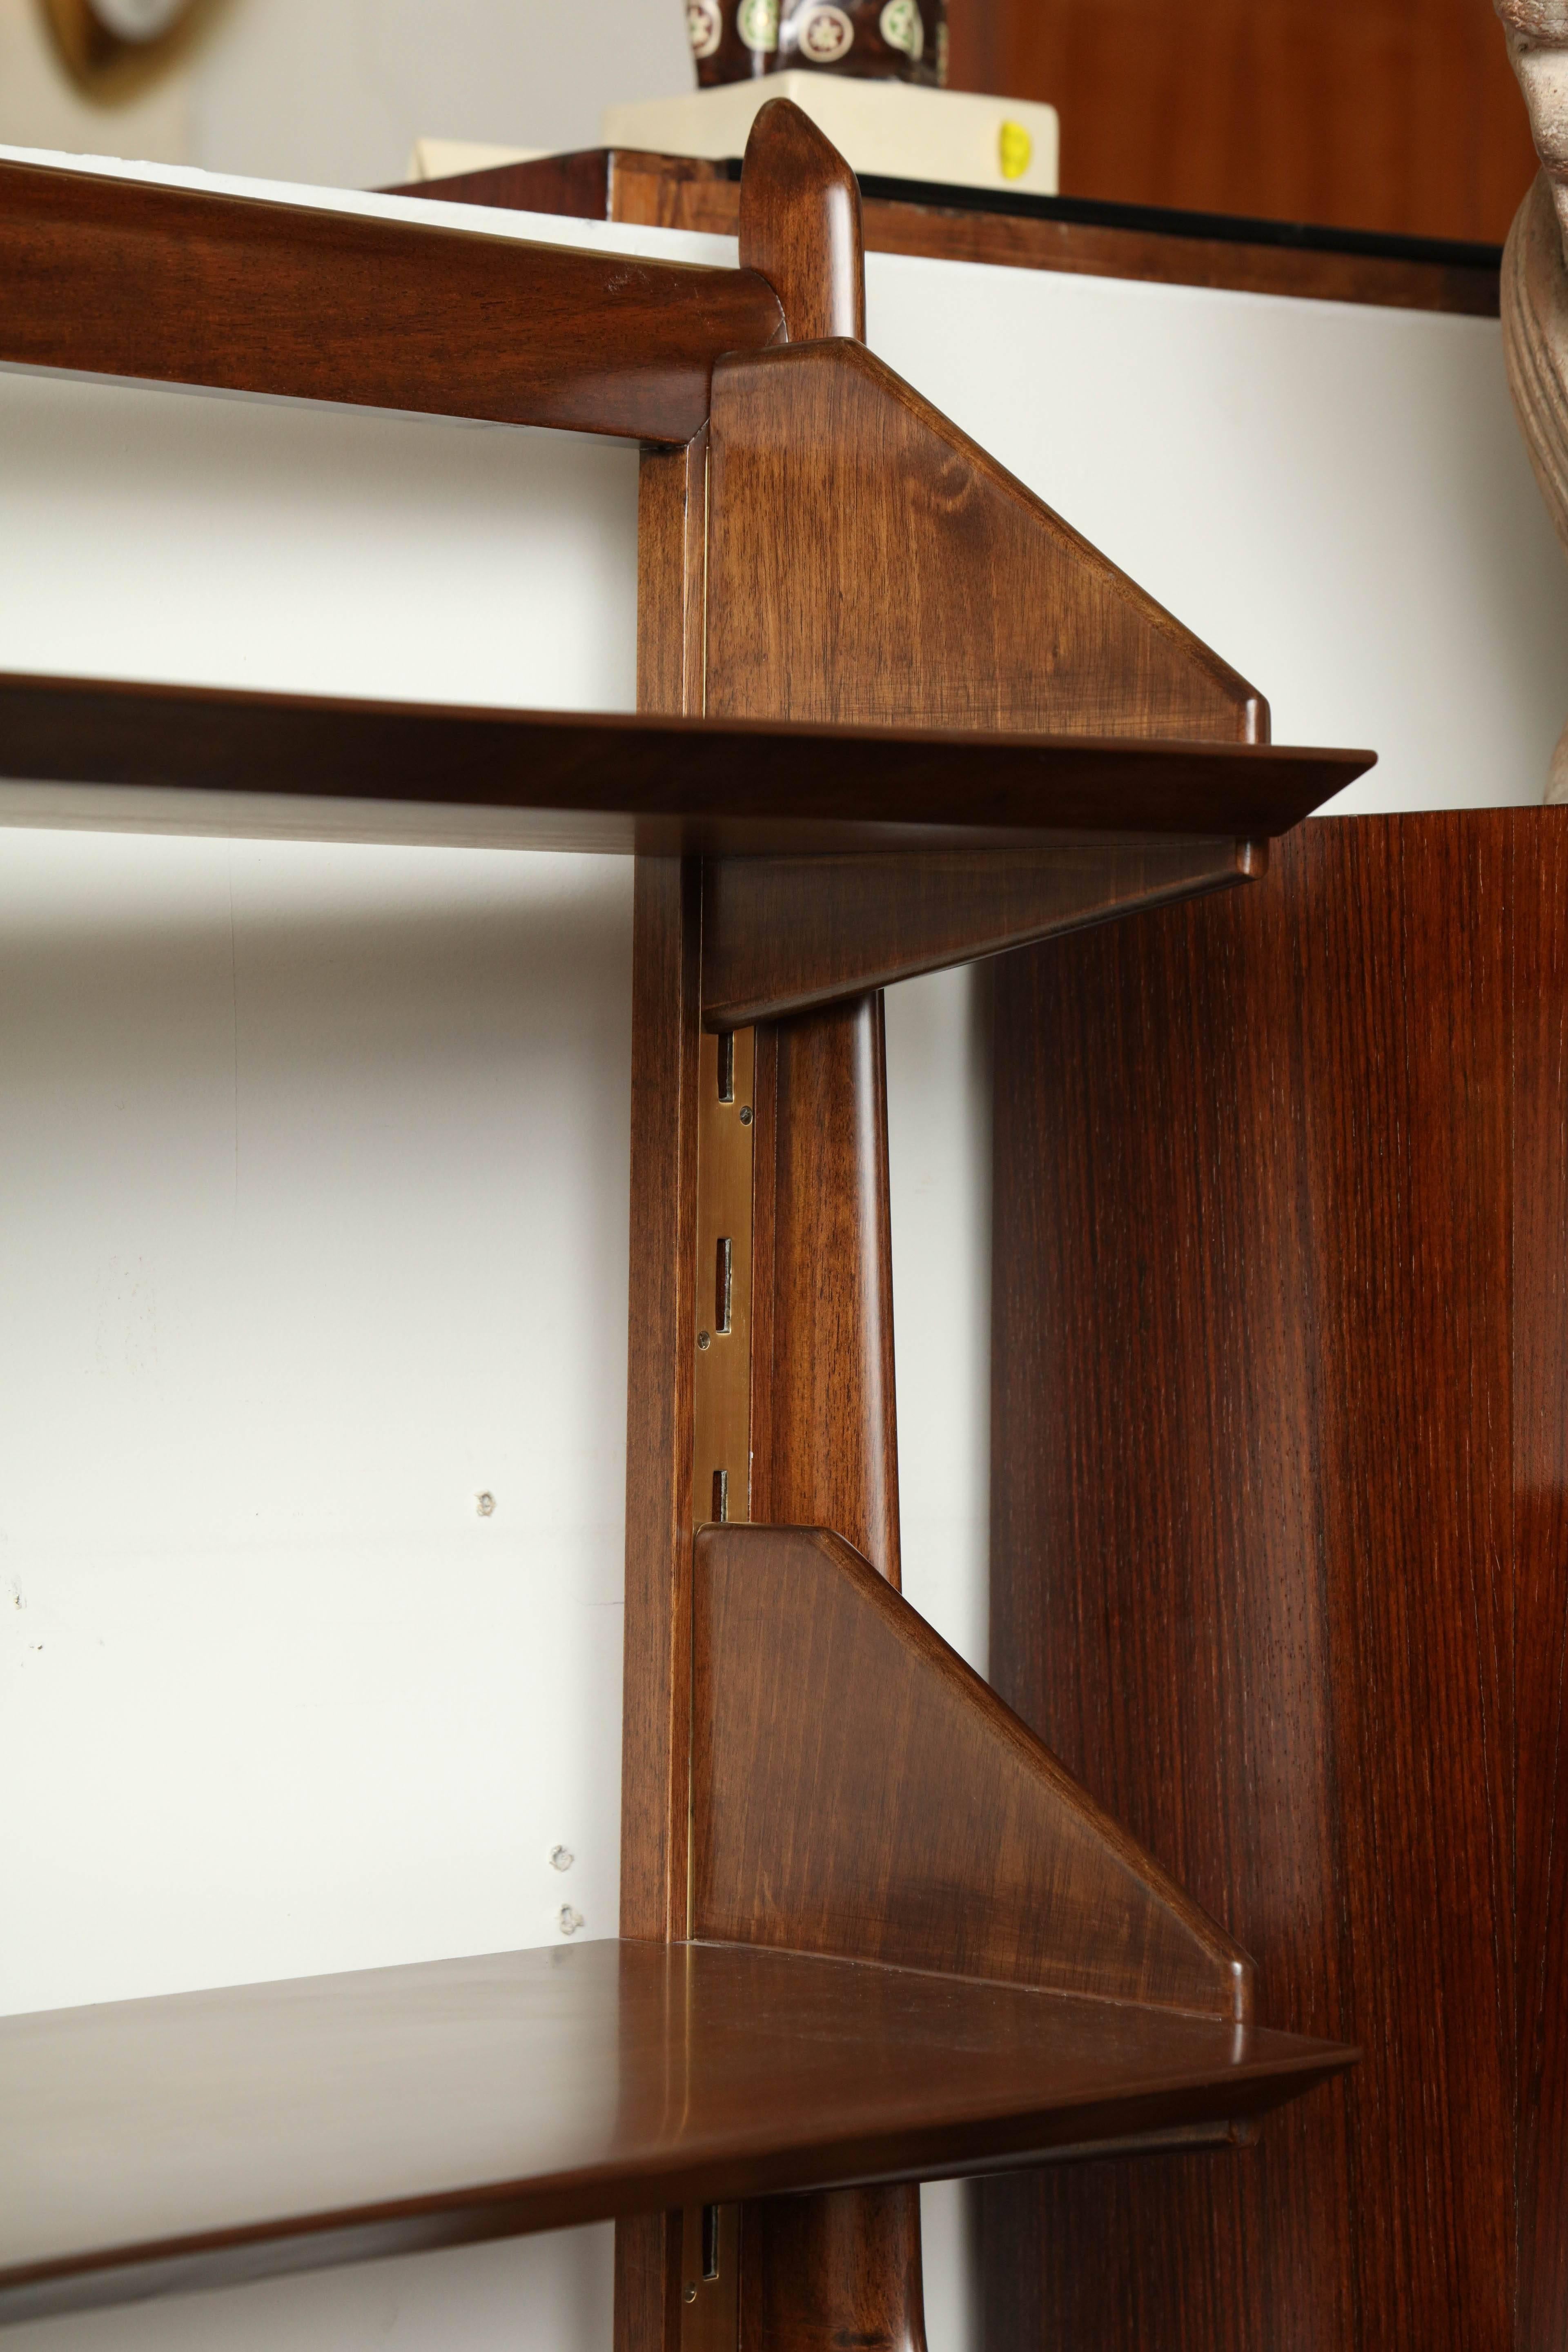 Walnut Parisi four shelf book case made in Italy 1955 For Sale